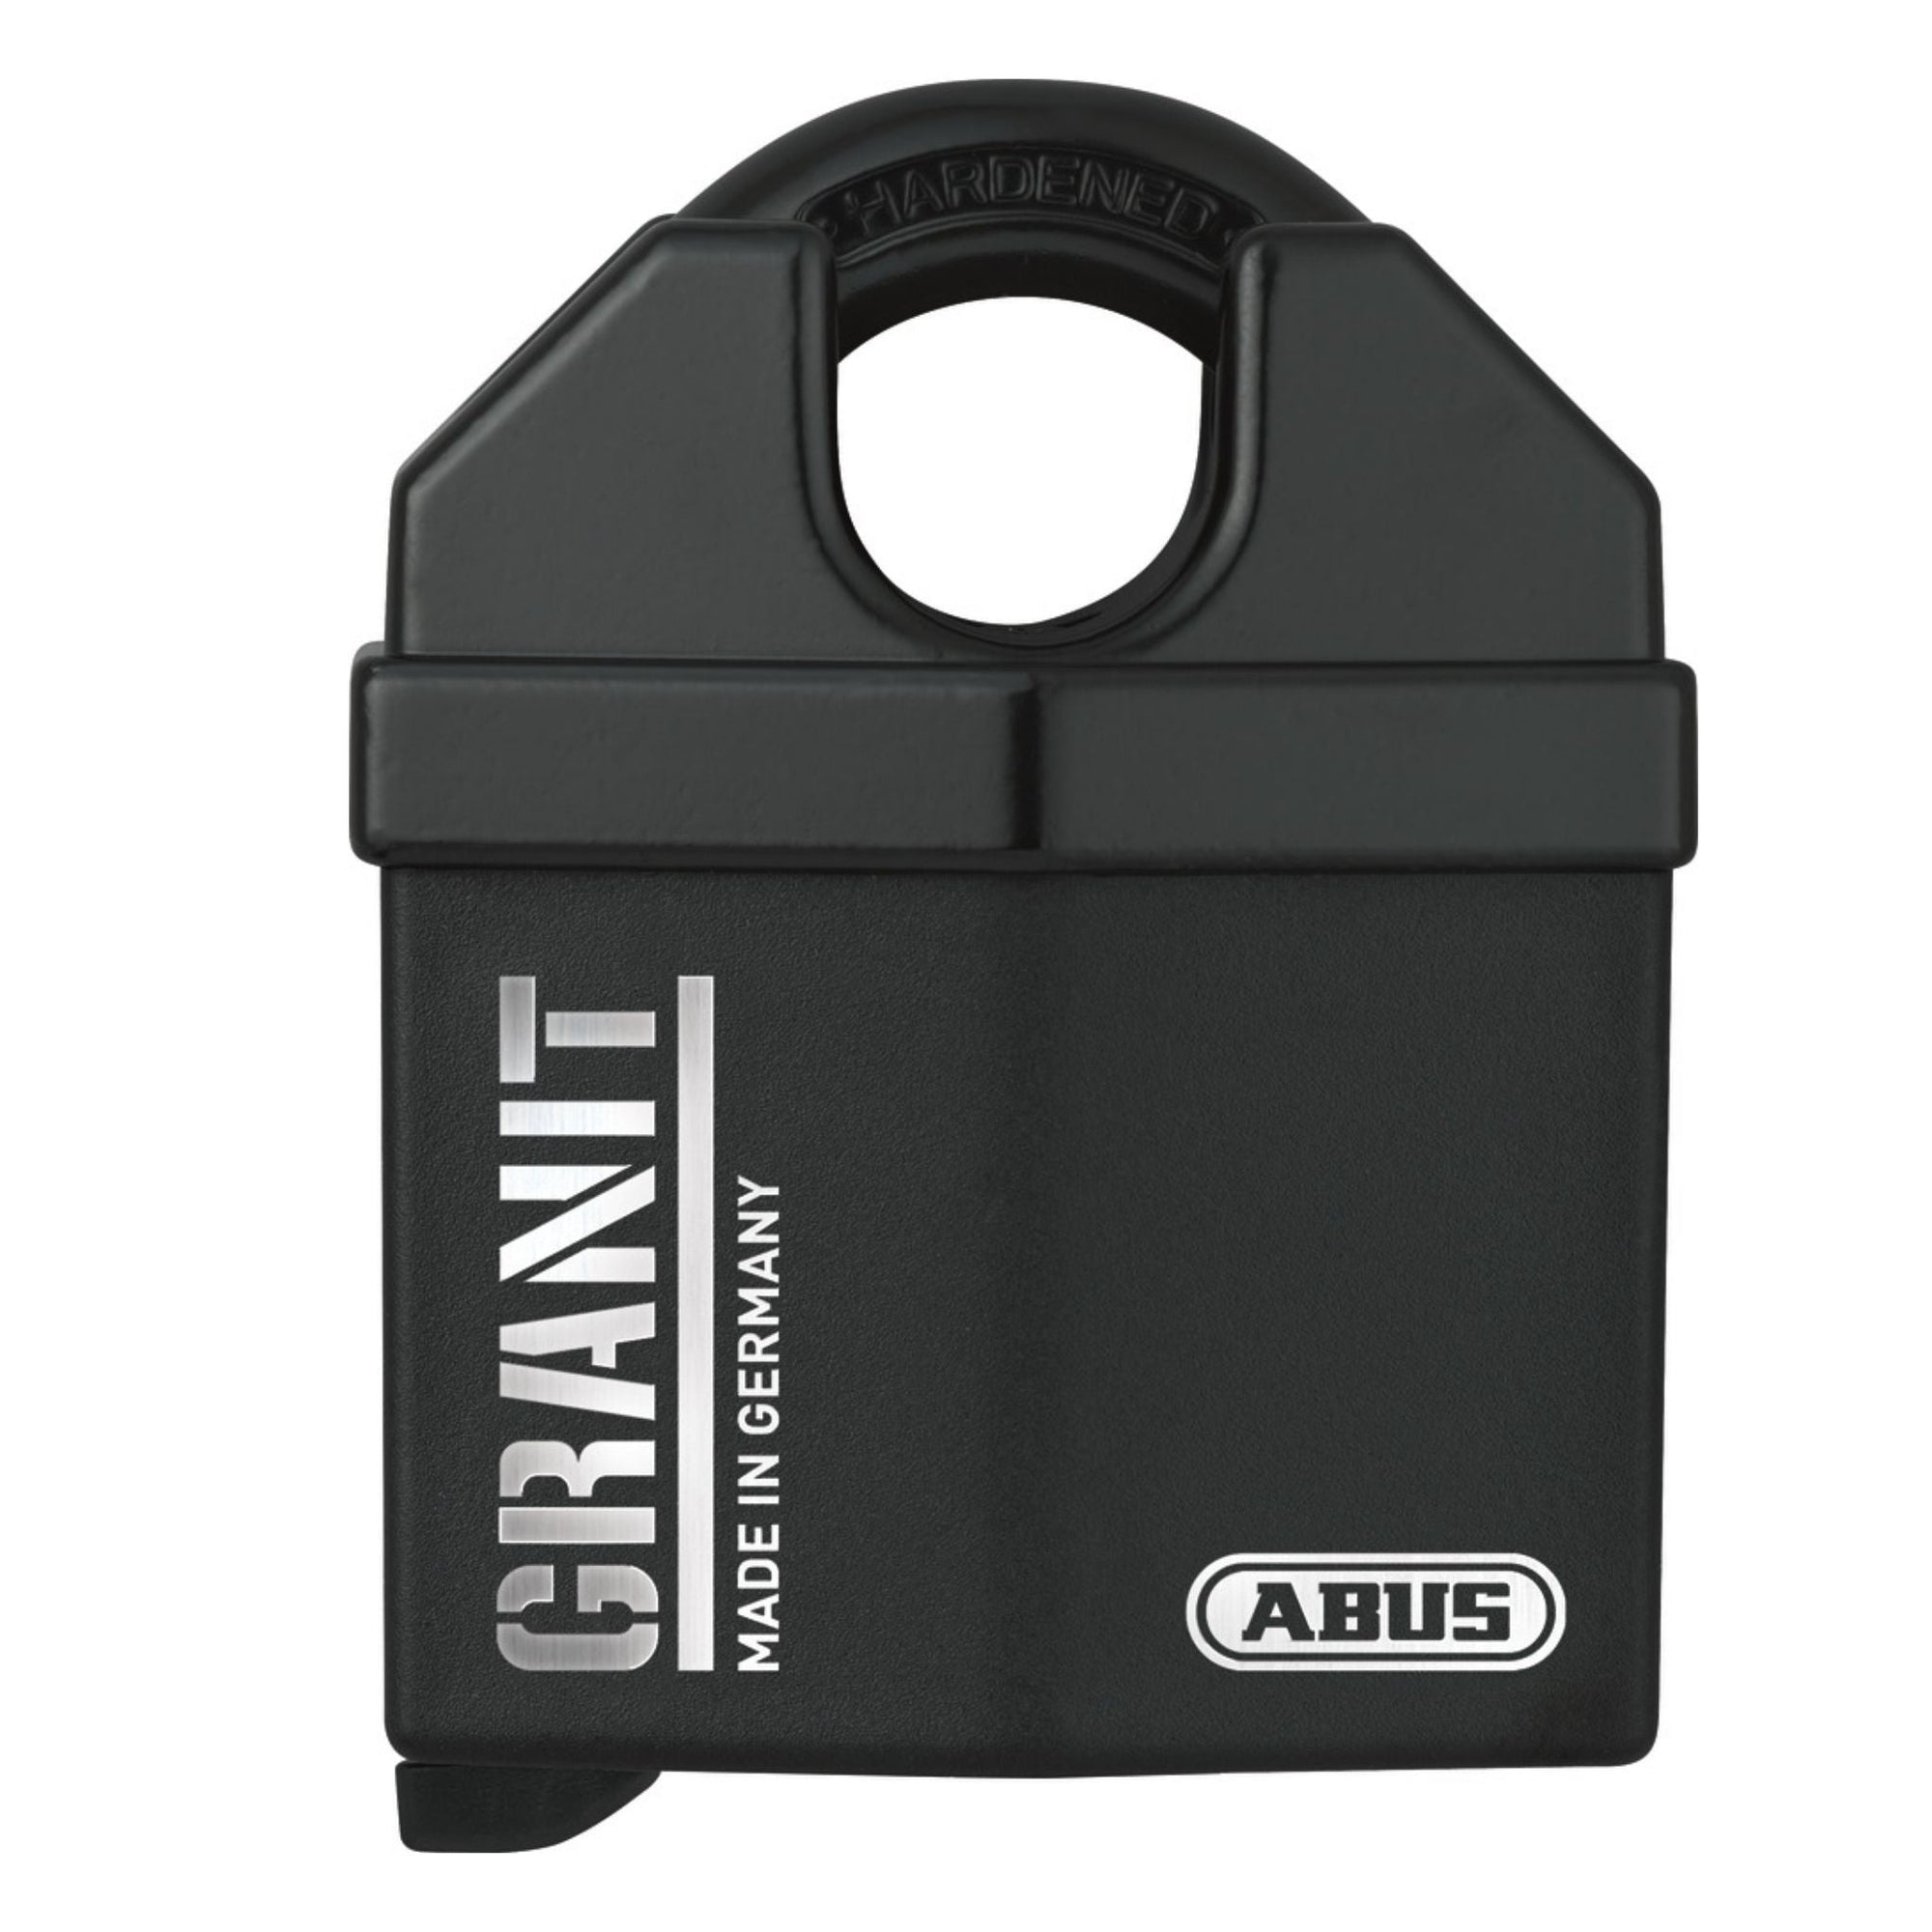 Abus 37/60 KA 5544653 Granit Padlock Keyed Alike to Match Existing Key Number 5544653 Granite Padlocks Are Among the Strongest Locks in the World, Level 10 Security – The Lock Source